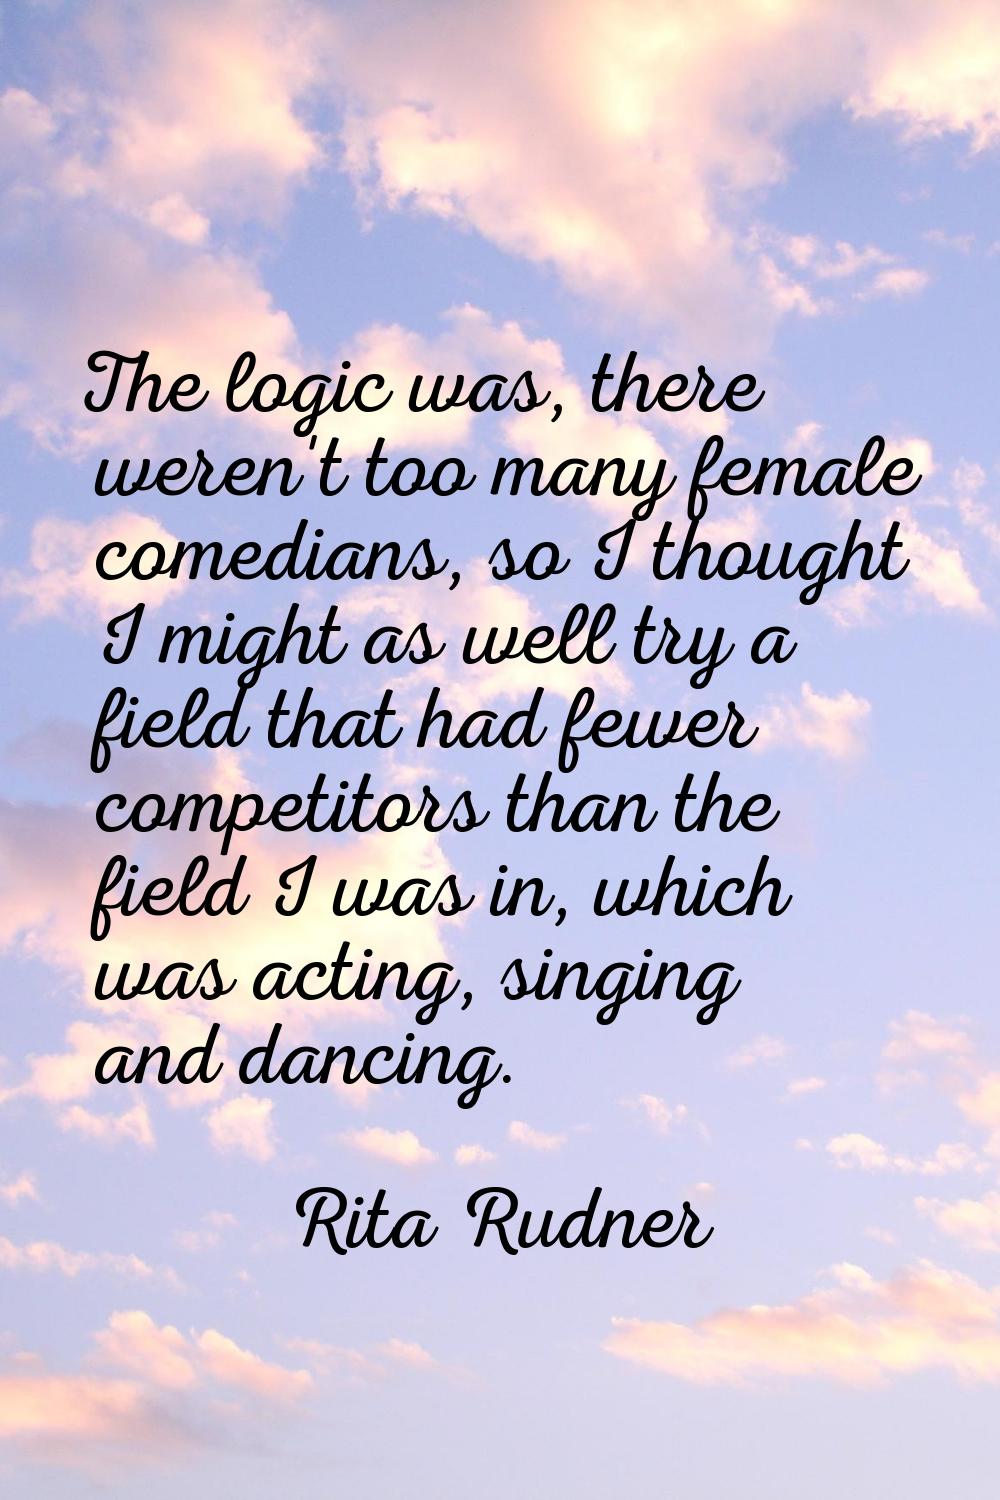 The logic was, there weren't too many female comedians, so I thought I might as well try a field th